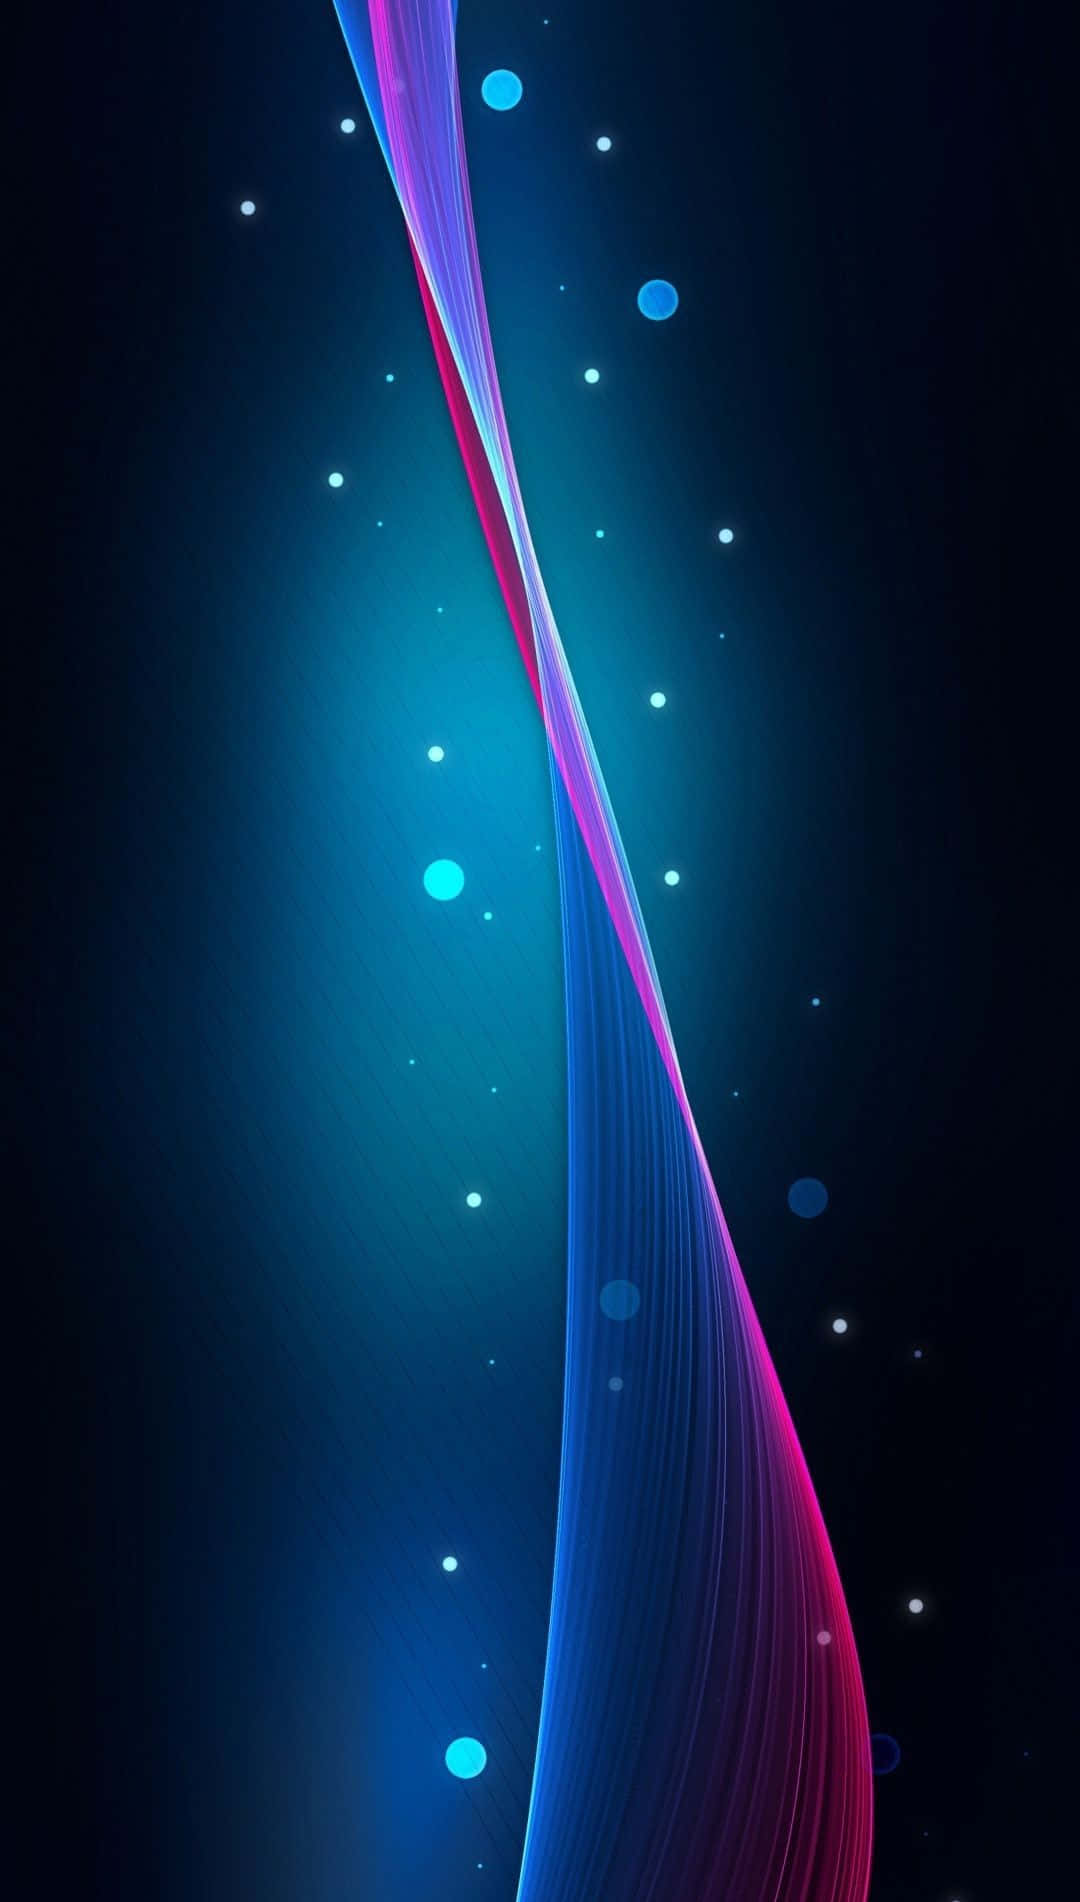 Unlock the World of Possibilities with the Samsung Galaxy S3 Wallpaper